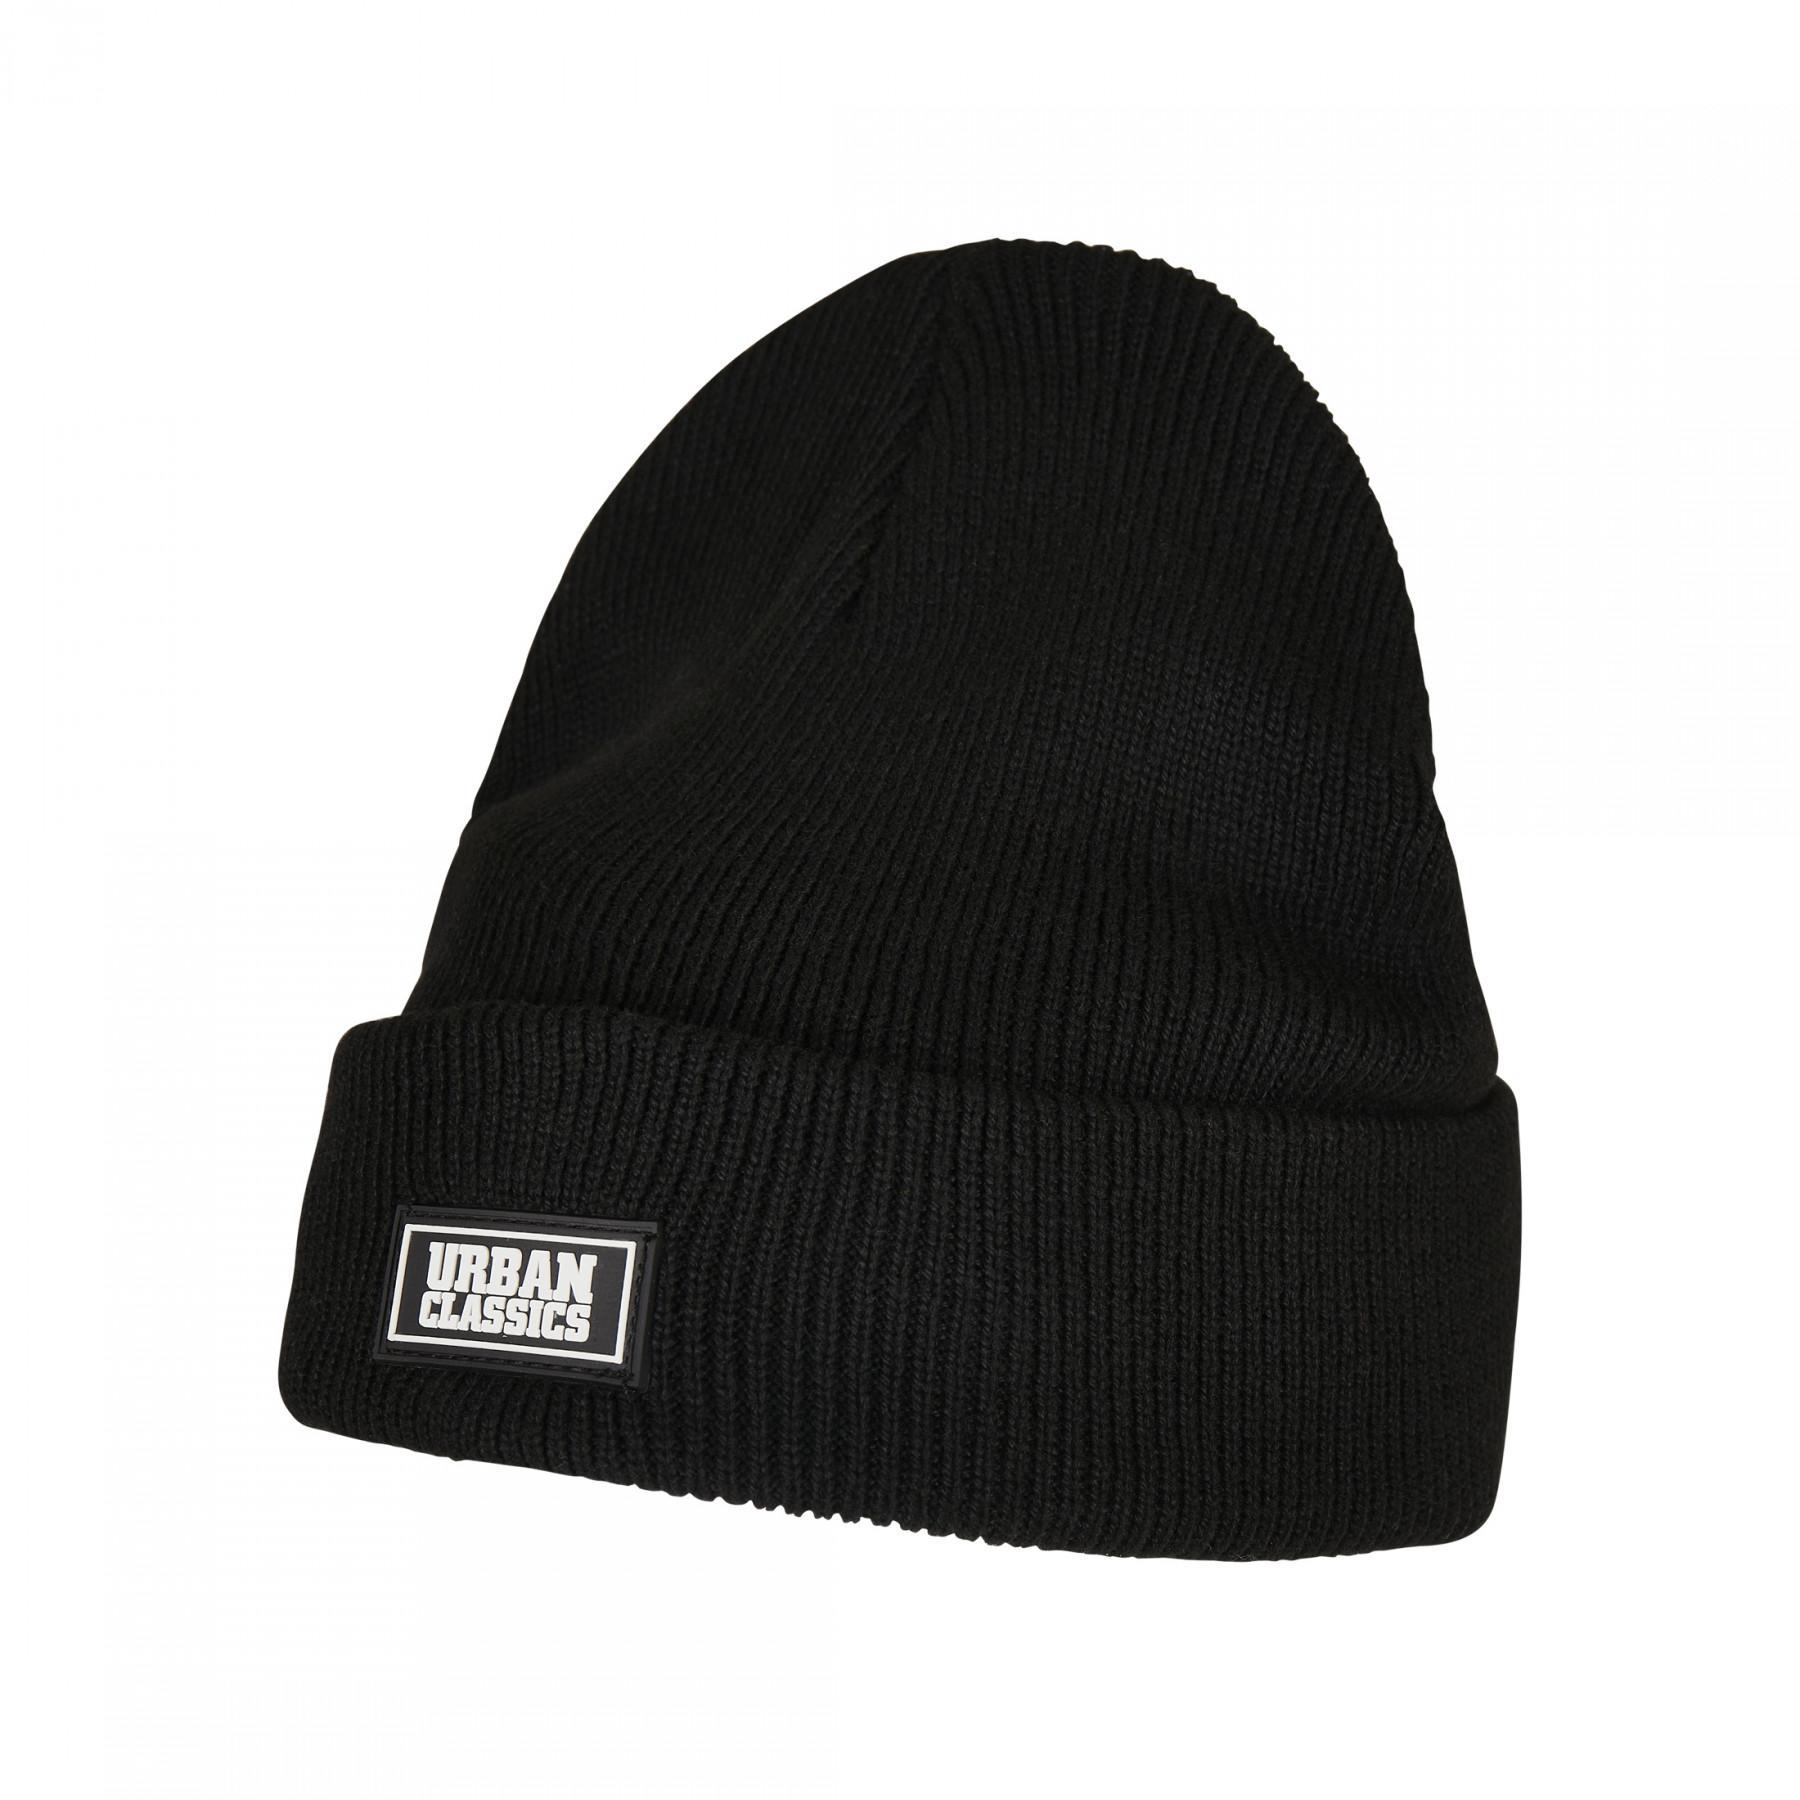 Beanie with sustainable yarn Urban Classics recyclable